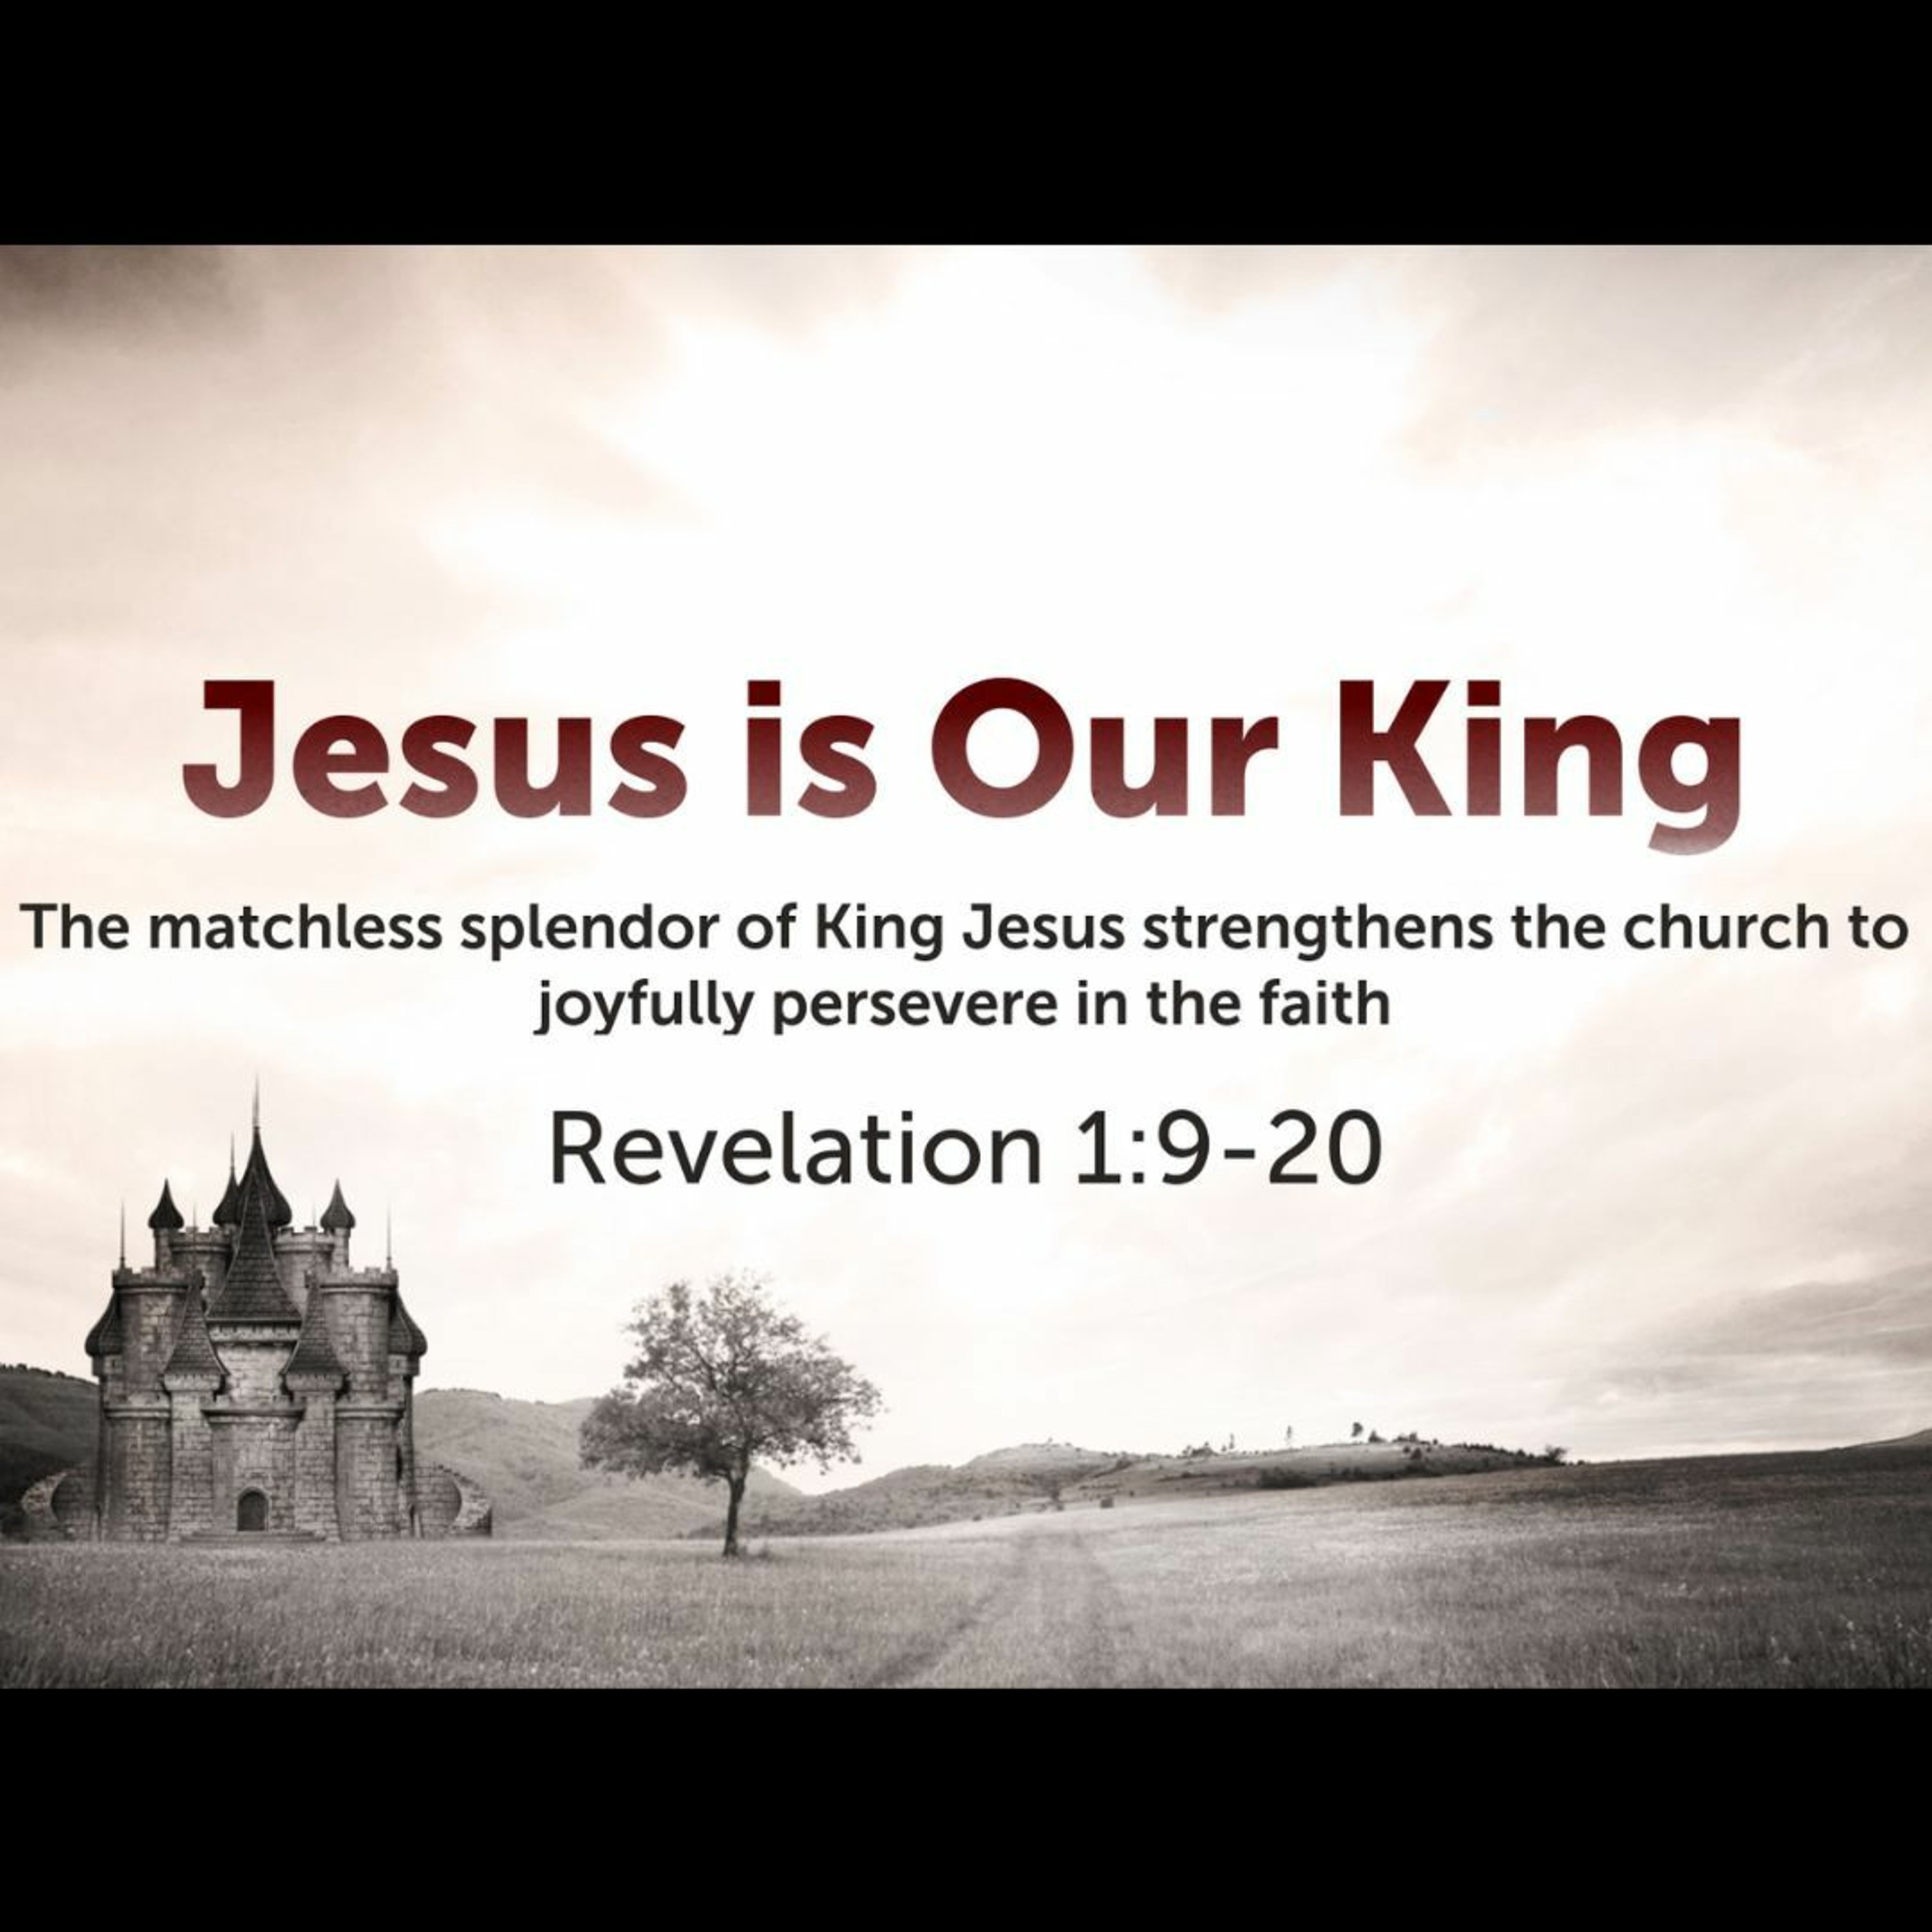 Jesus Is Our King (Revelation 1:9-20)